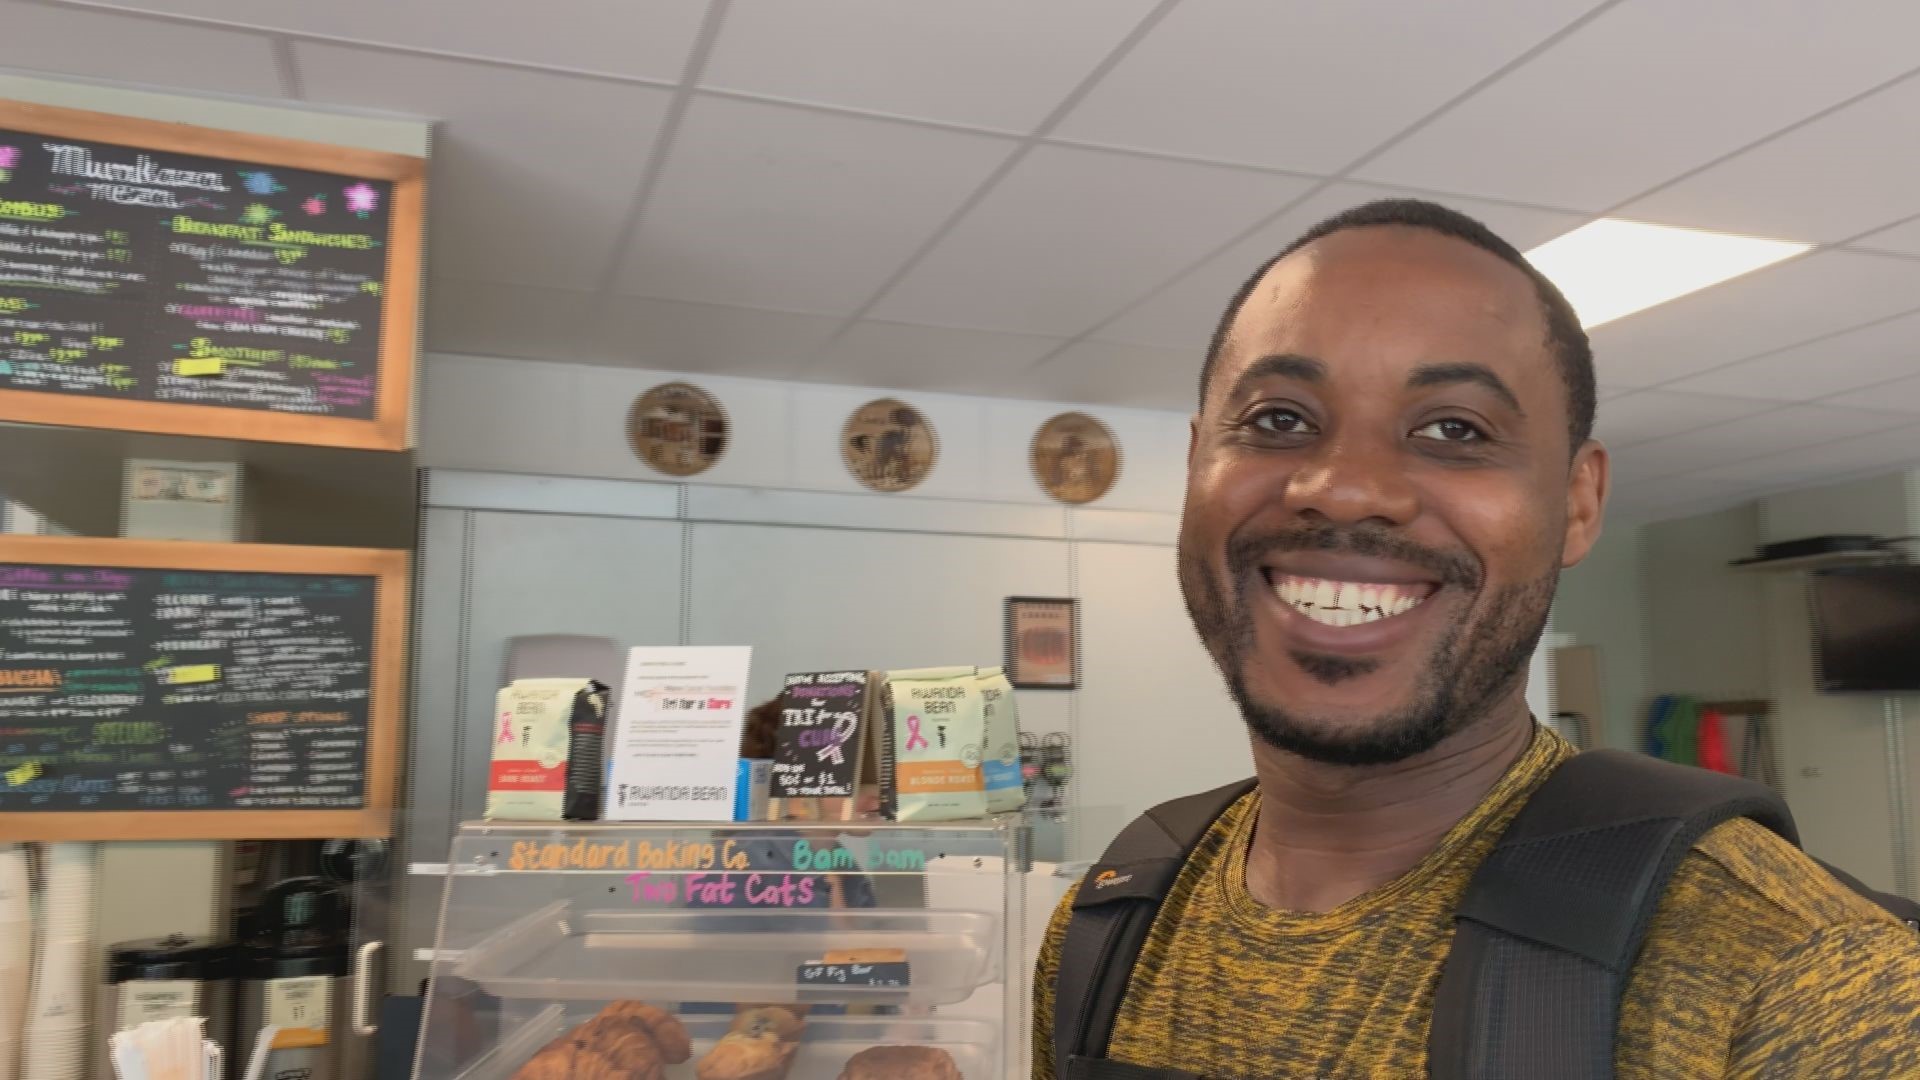 Mike Mwenedata, owner of Rwanda Bean Coffee in South Portland is jogging coffee orders for 30 days to anyone within 10 miles of his shop. All the proceeds go to Tri For A Cure. So far he has run over 300 miles.